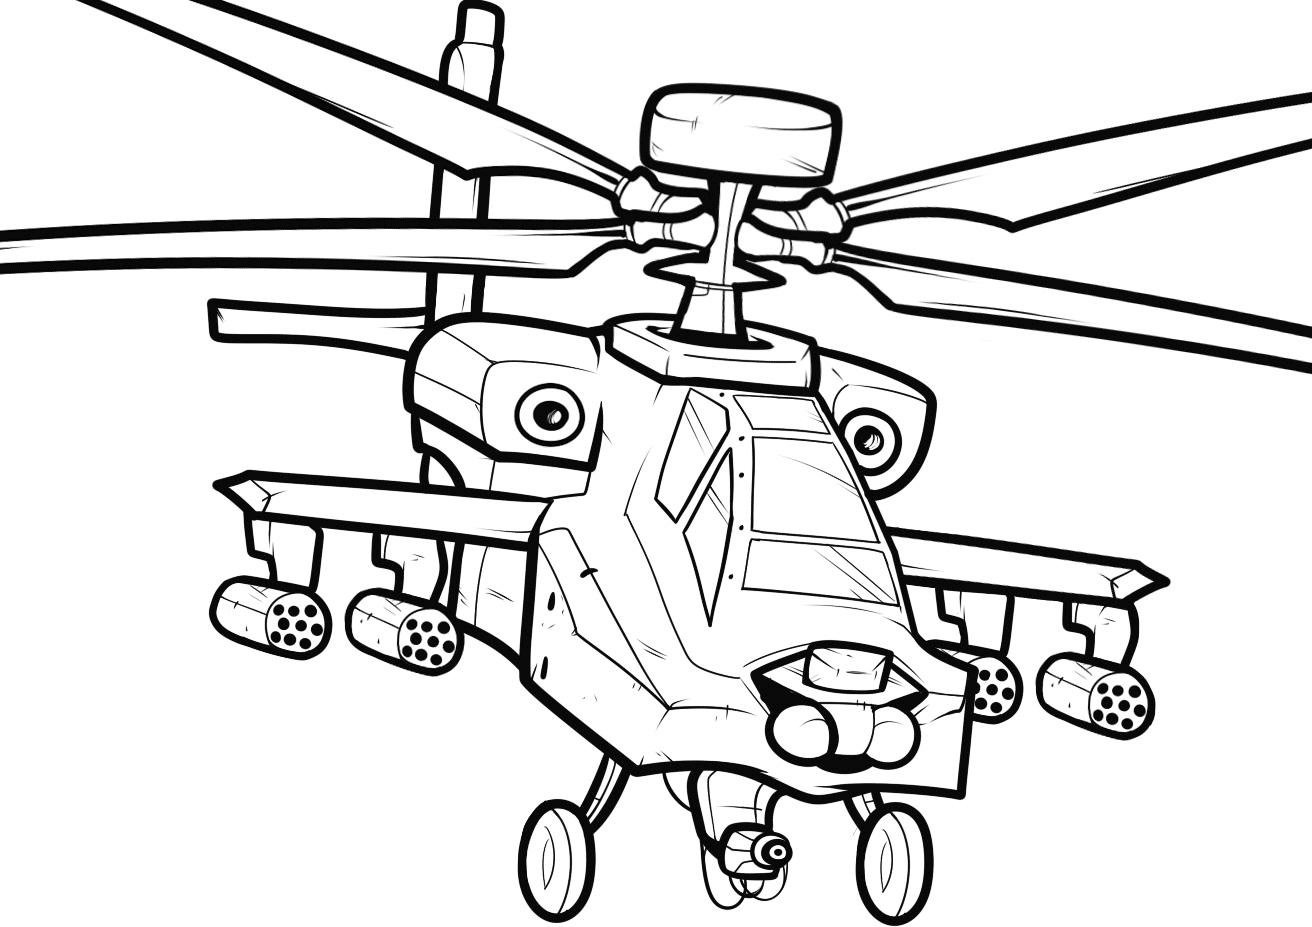 Print and Color Helicopter Coloring Pages for Kids Apache Attack Helicopter